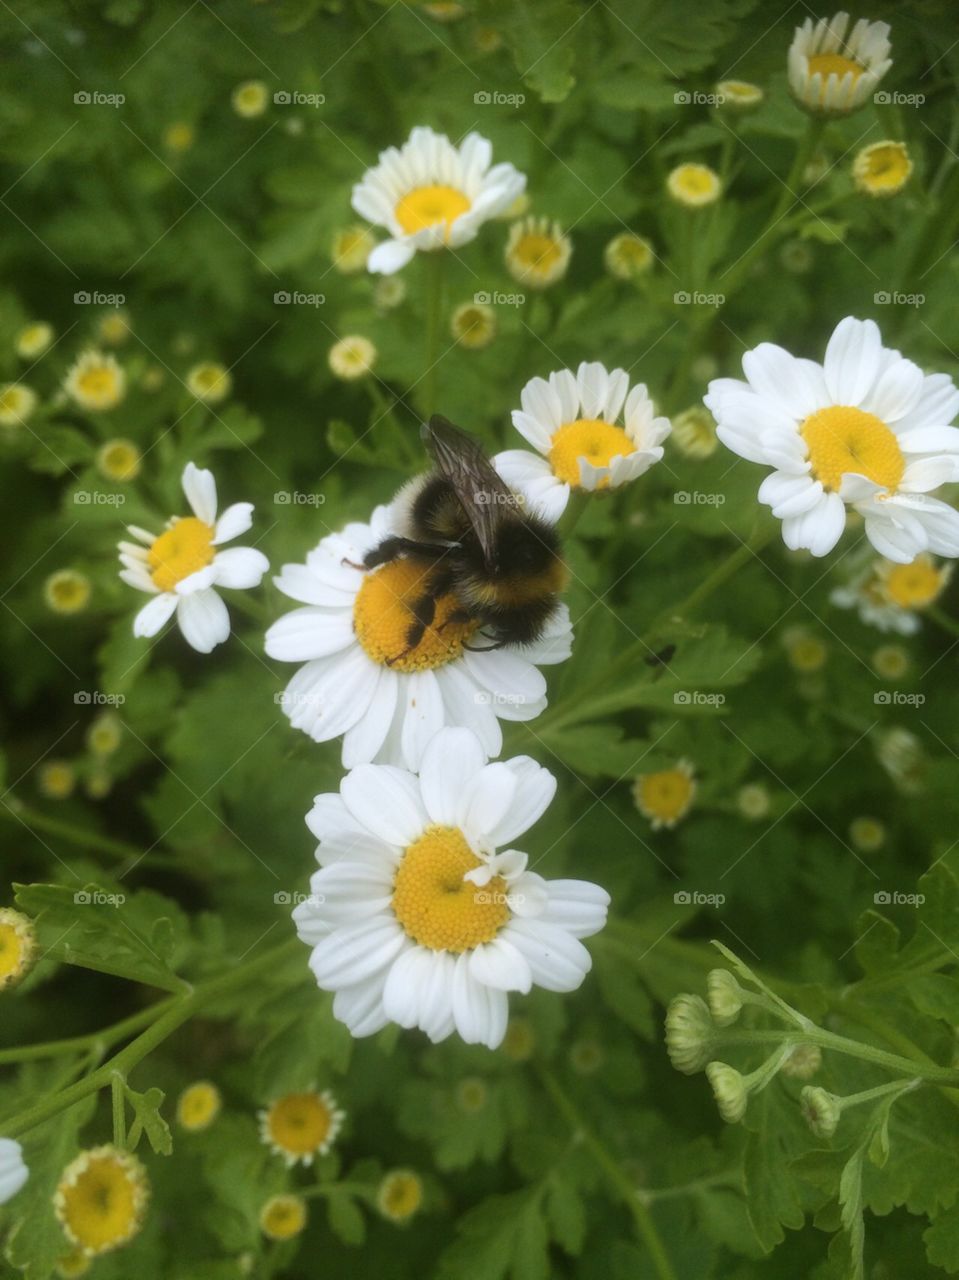 Bee enjoying the bright white and yellow feverfew blooming in this summer garden. 